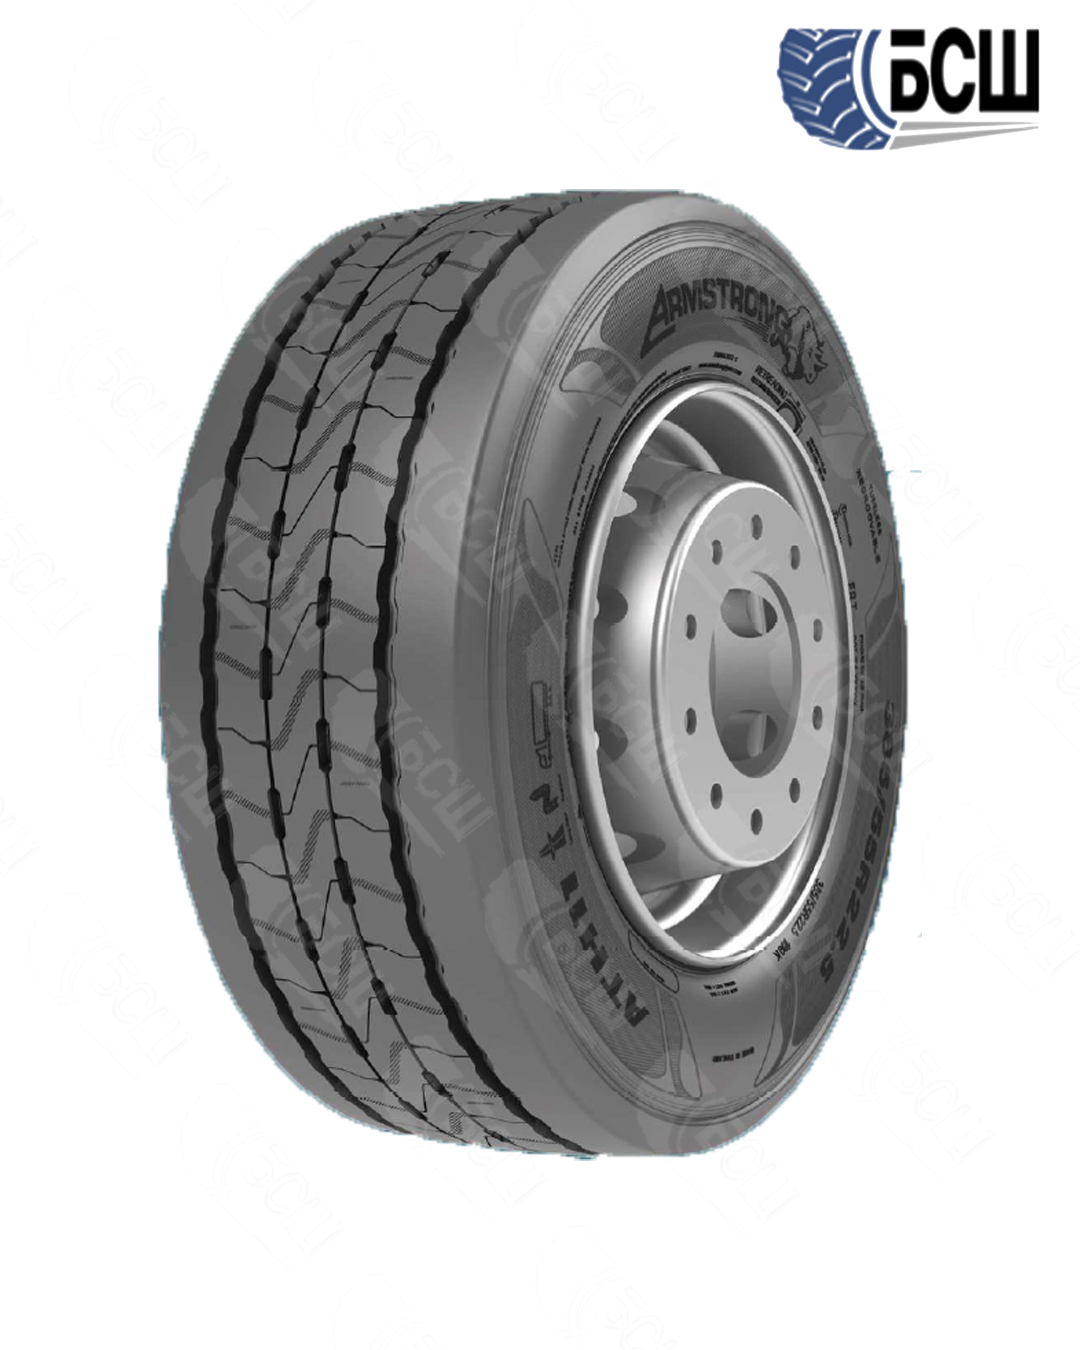 Шина 385/65R22.5/20 ATH11 ARMSTRONG 160K M+S 3PMSF TL(T)